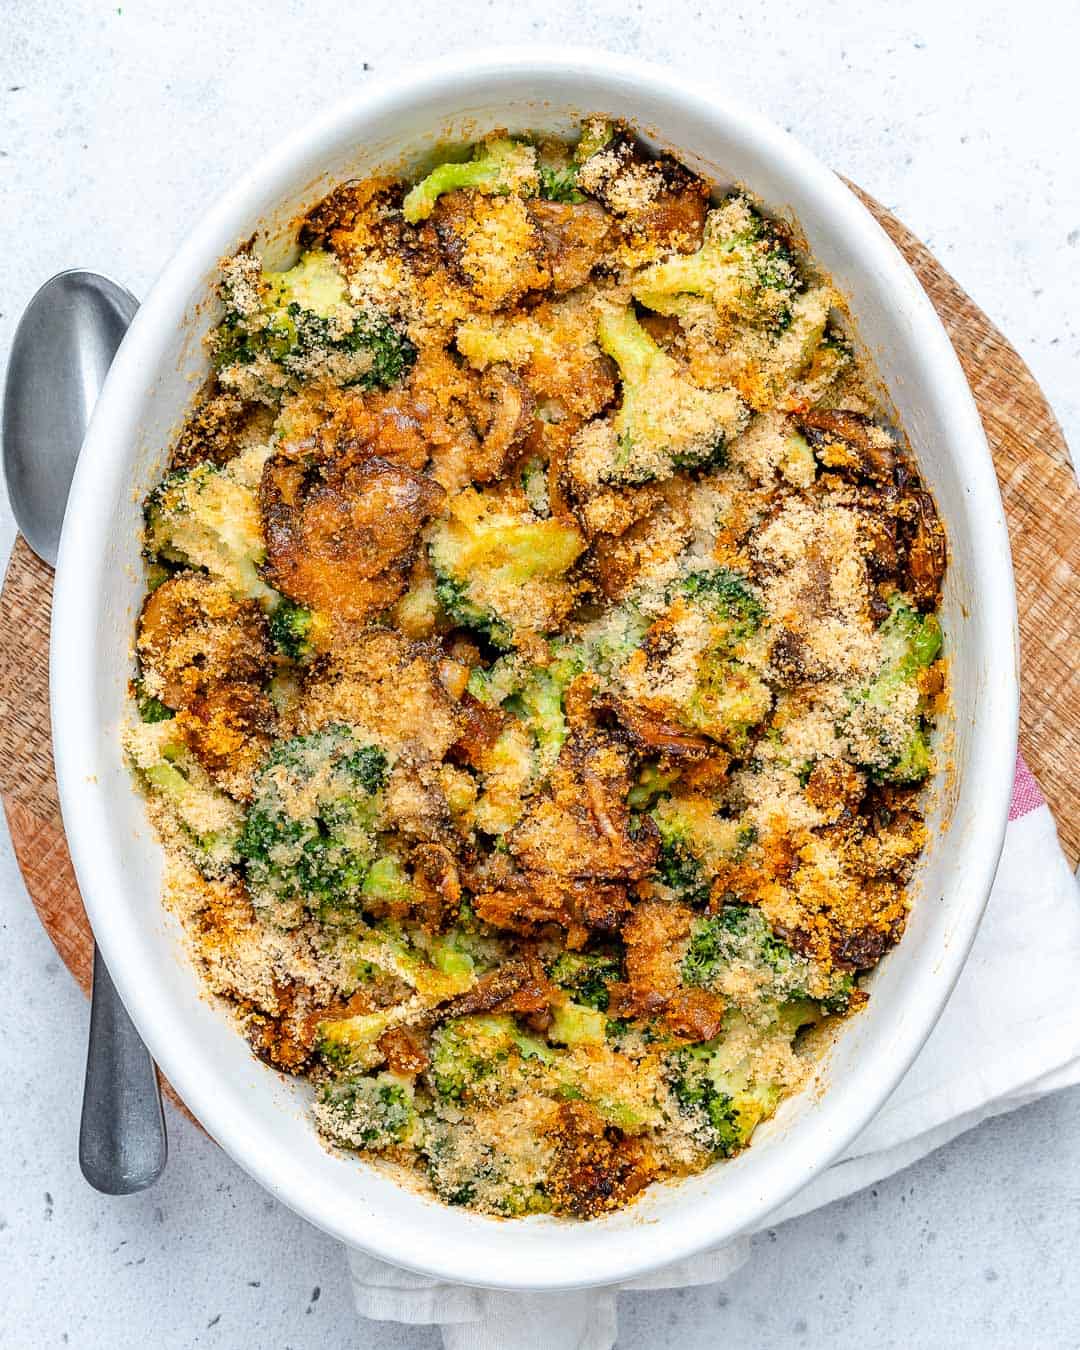 healthy broccoli casserole with mushrooms and no cheese